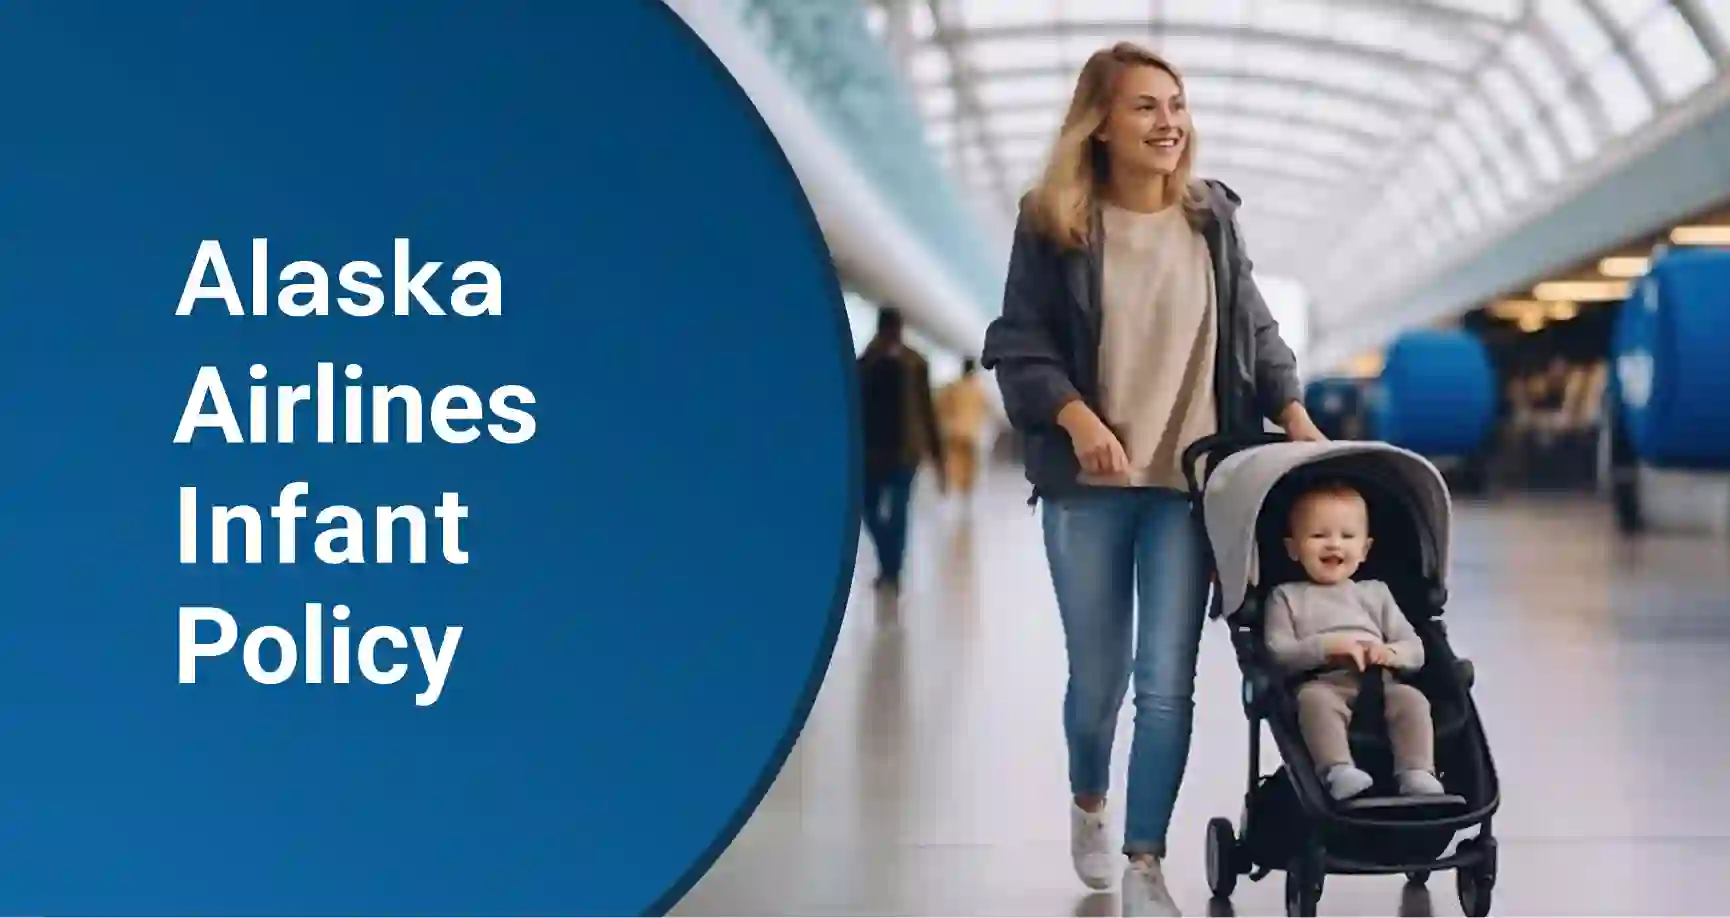 Alaska Airlines Infant Policy